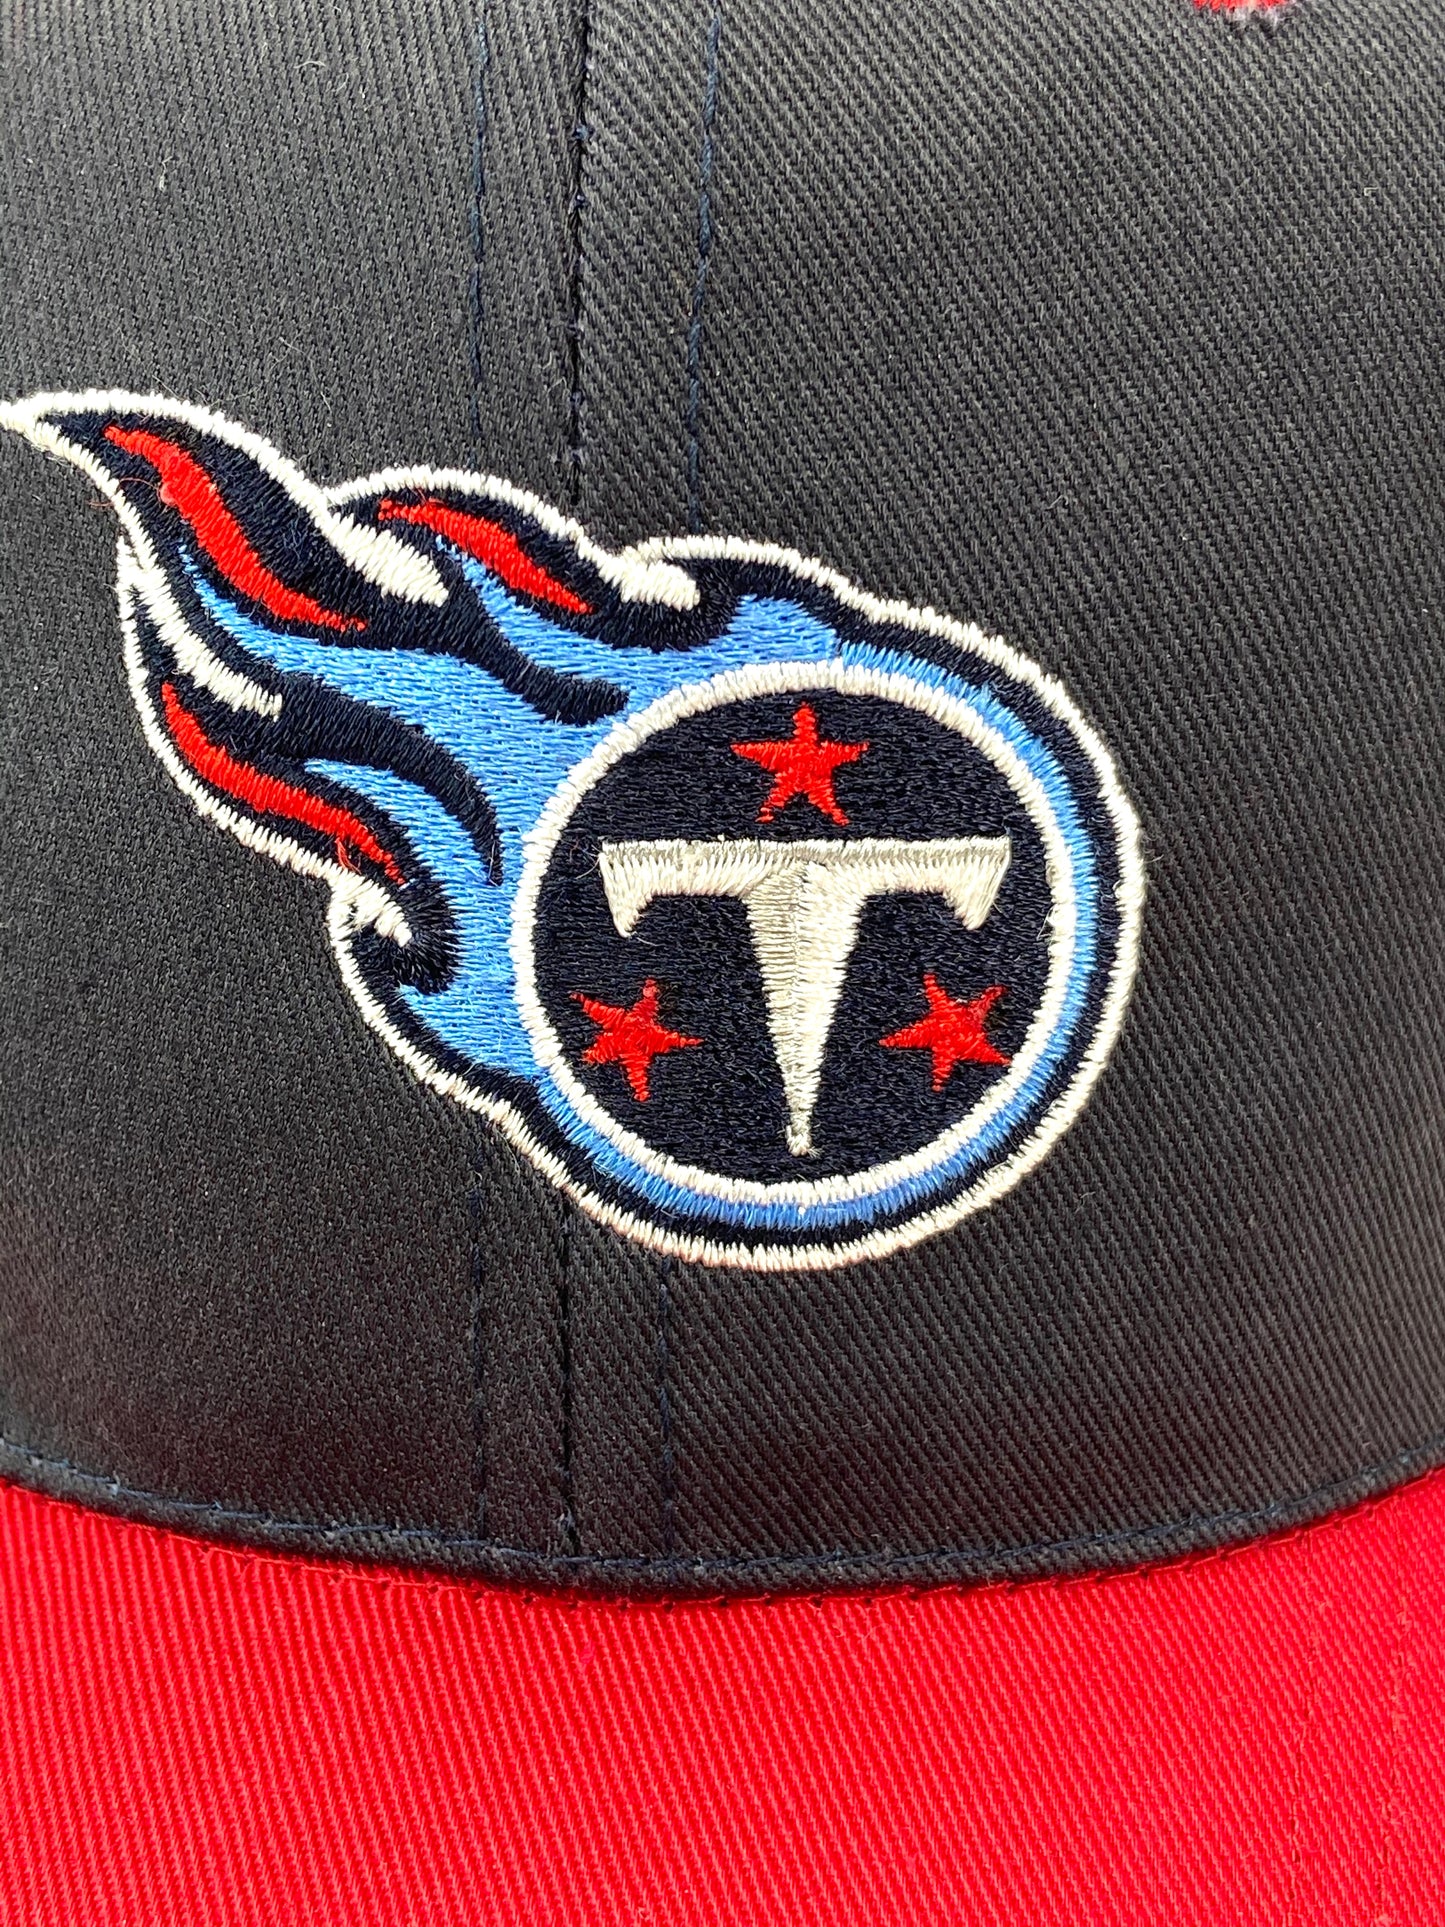 Tennessee Titans Vintage NFL Navy/Red Twill Snapback Replica Cap by Drew Pearson Marketing